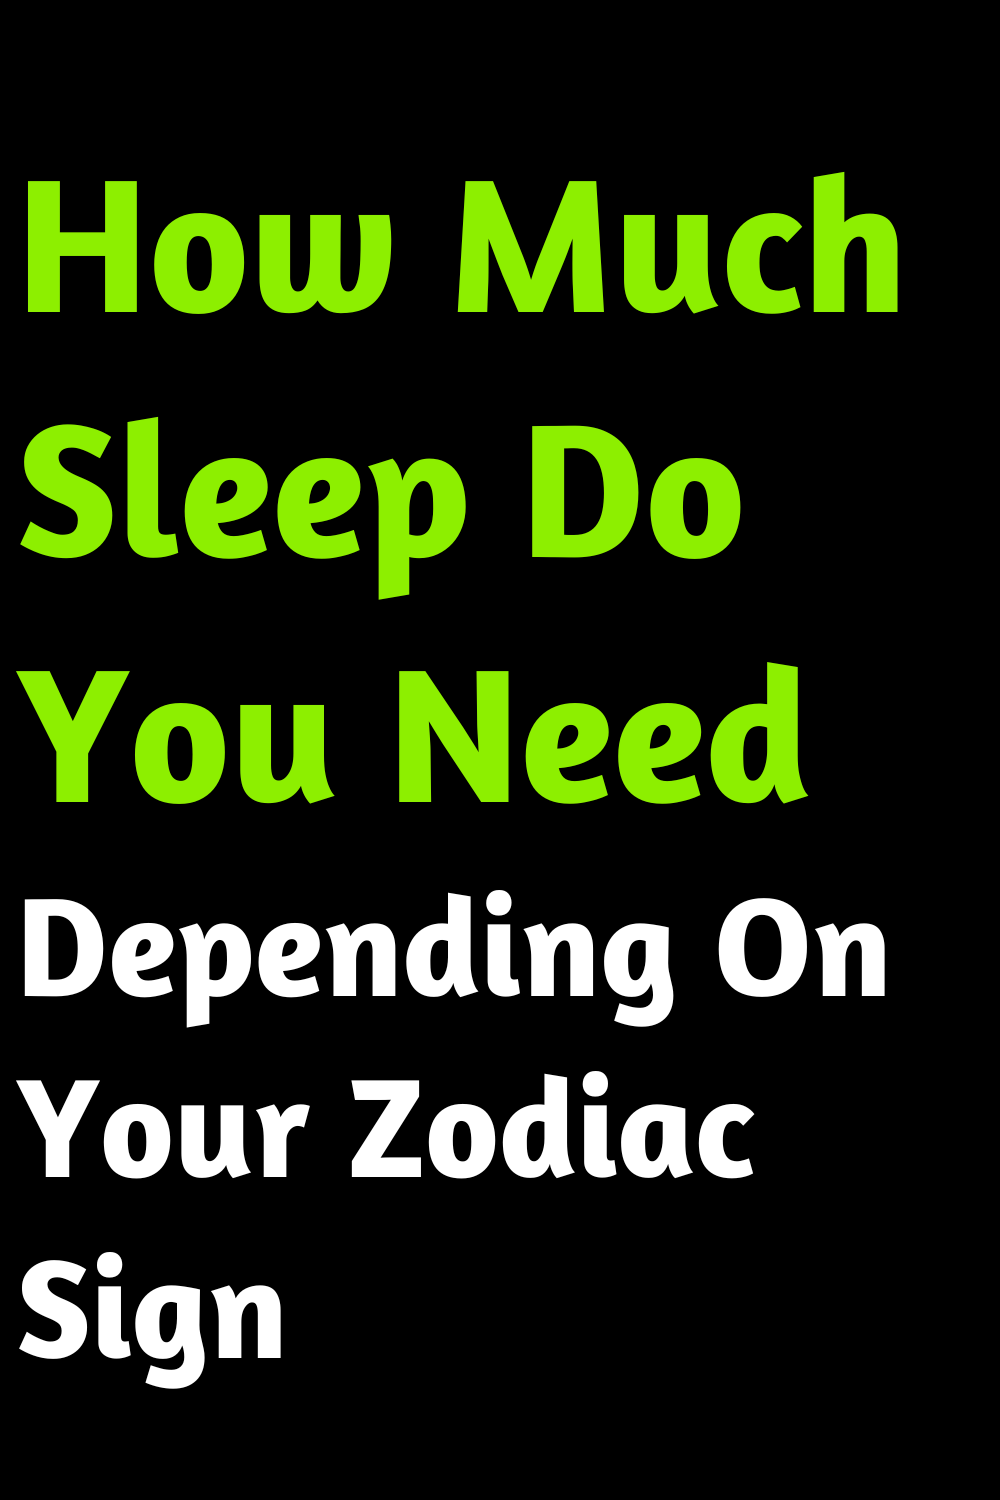 How Much Sleep Do You Need Depending On Your Zodiac Sign